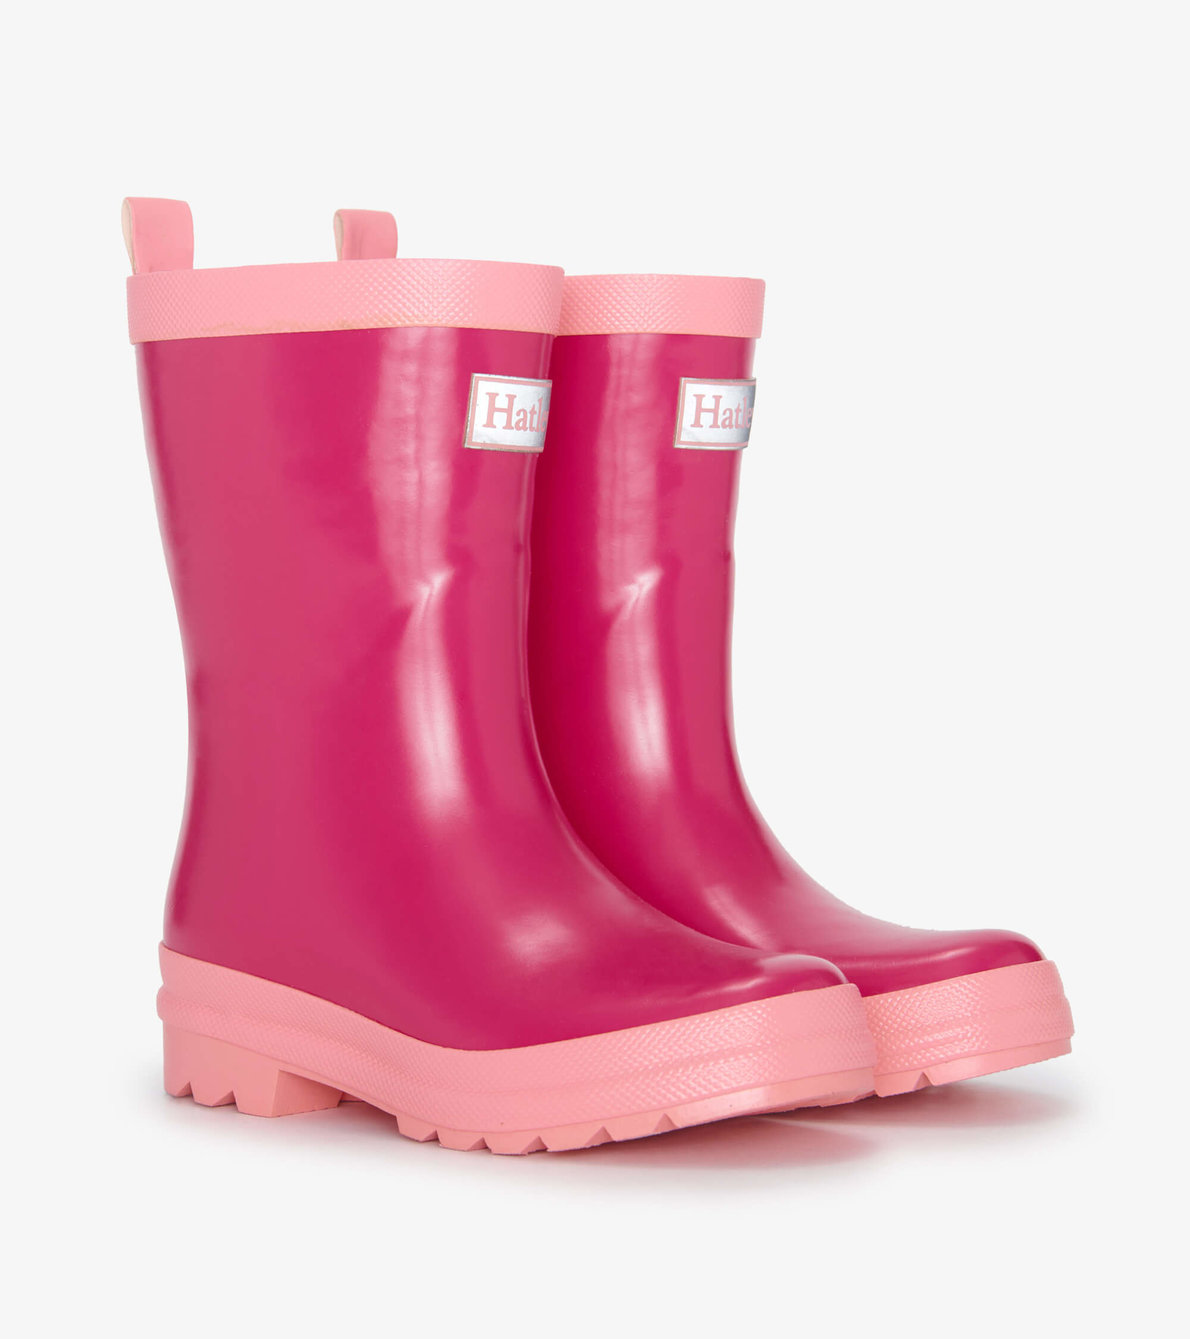 View larger image of Pink Shiny Rain Boots